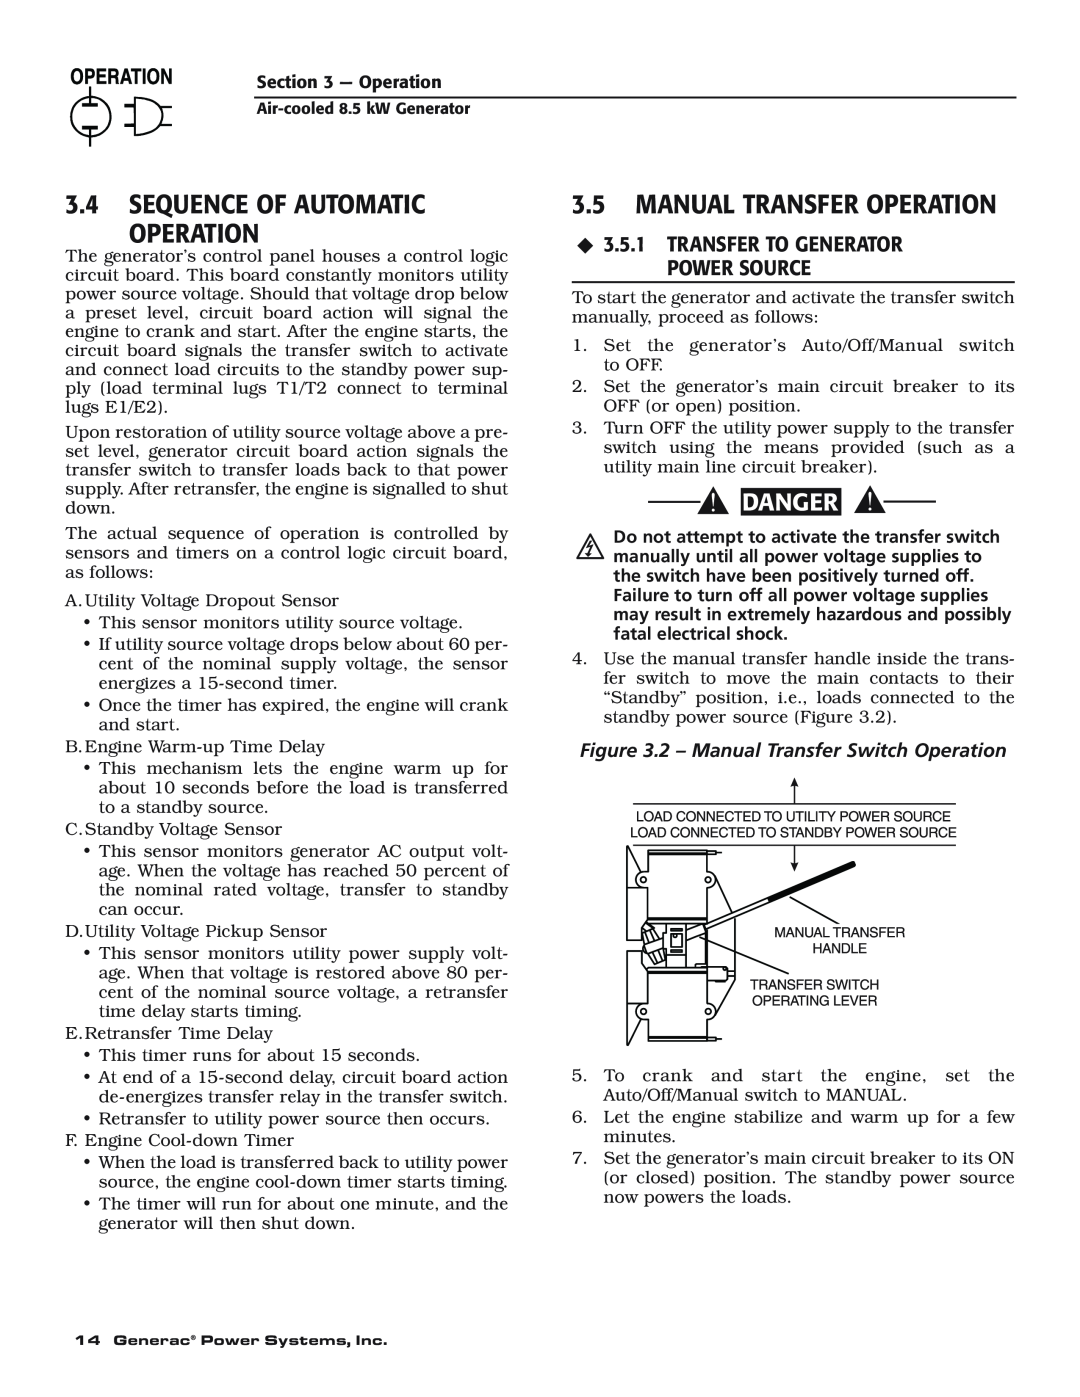 Generac 004692-0 3.4SEQUENCE OF AUTOMATIC OPERATION, 3.5MANUAL TRANSFER OPERATION, 2 – Manual Transfer Switch Operation 